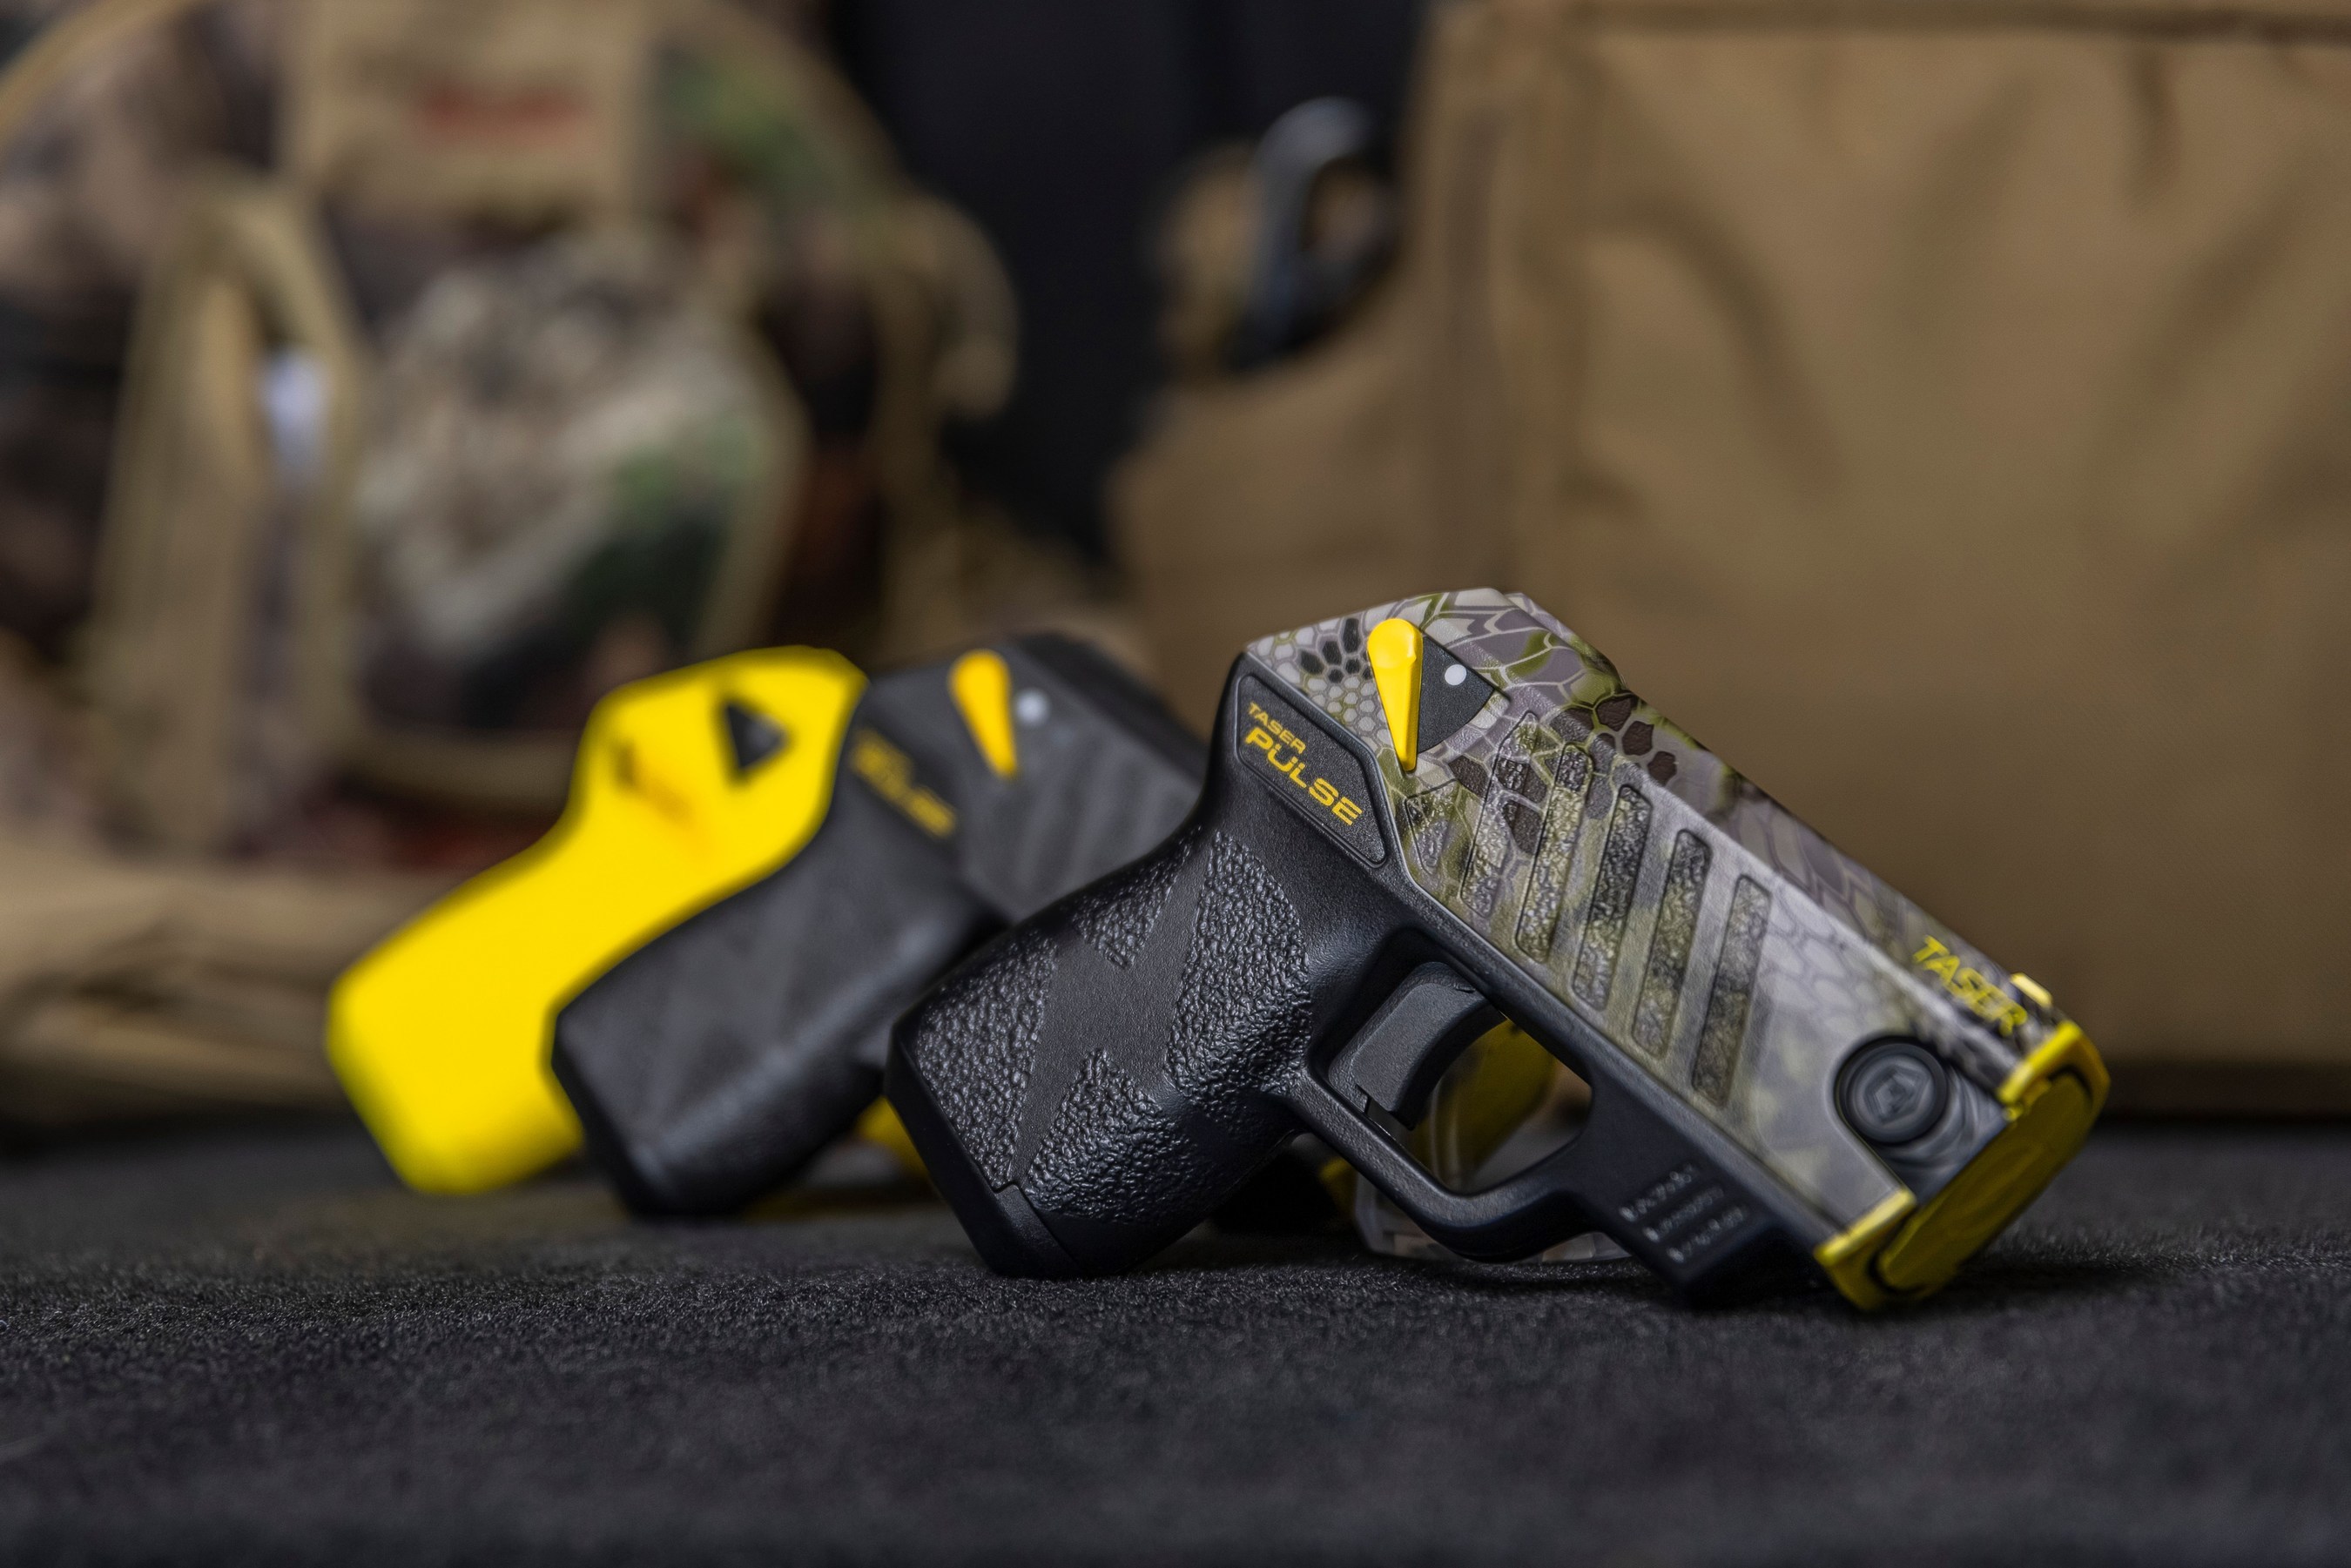 TASER Self-Defense Partners with Kryptek to Launch Limited Edition Personal  Self-Defense Product - Aug 9, 2021